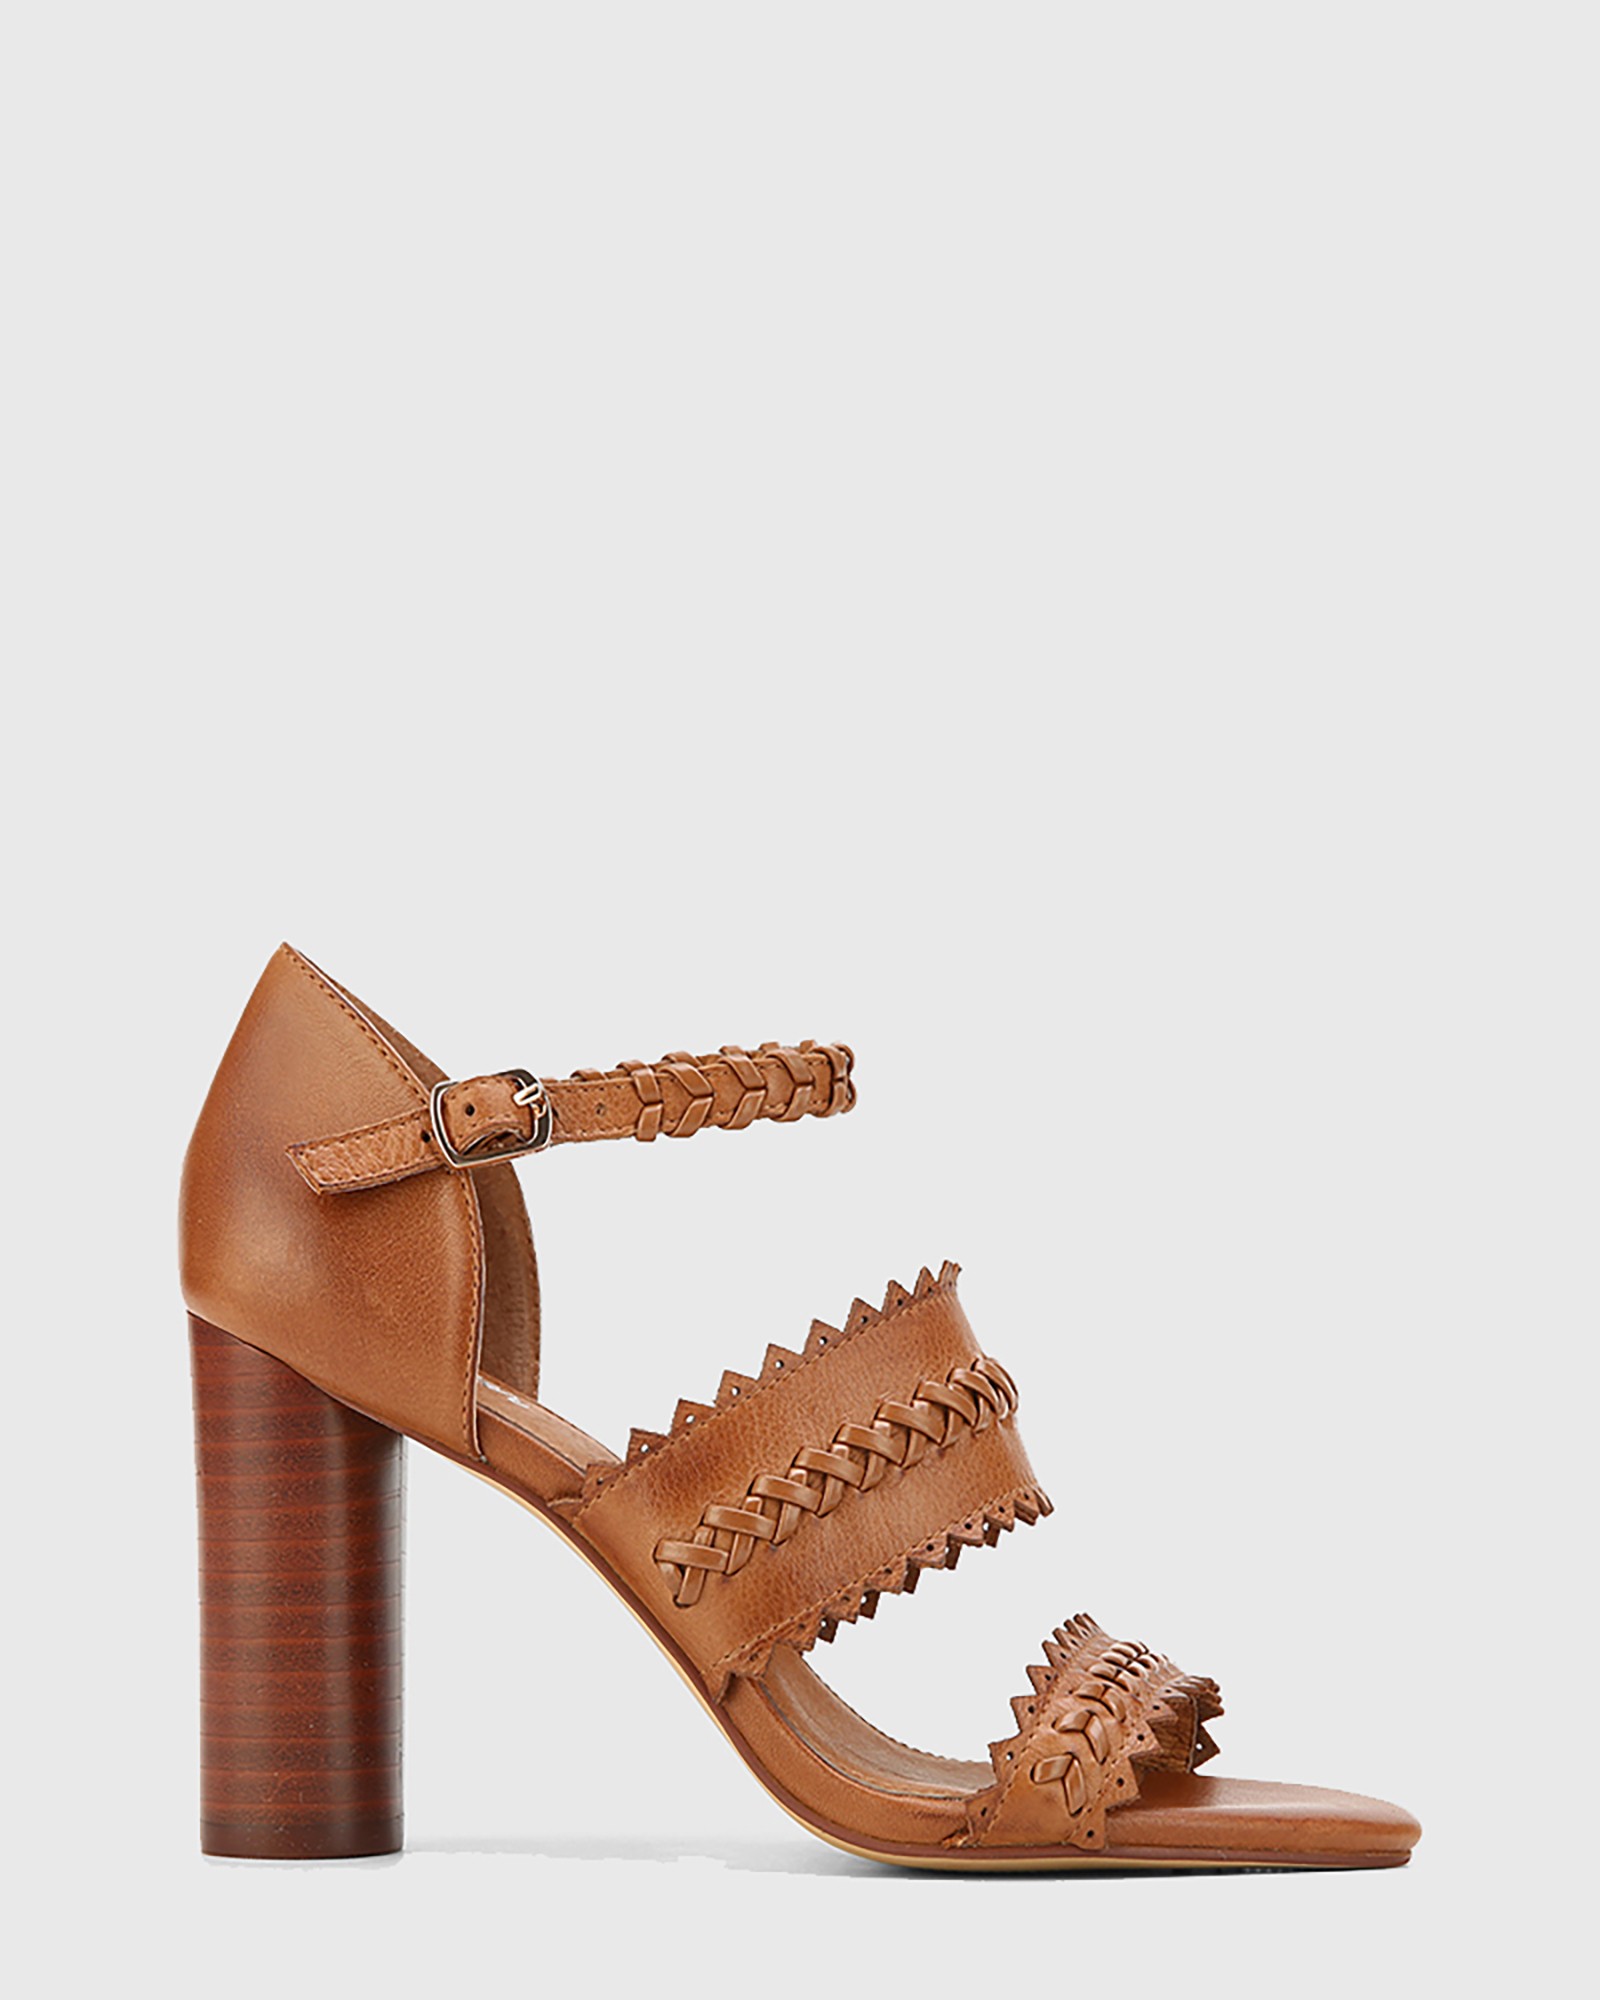 WMNS Sandal - Wide Leather Strap / Open Design / Chunky Heel / Brown